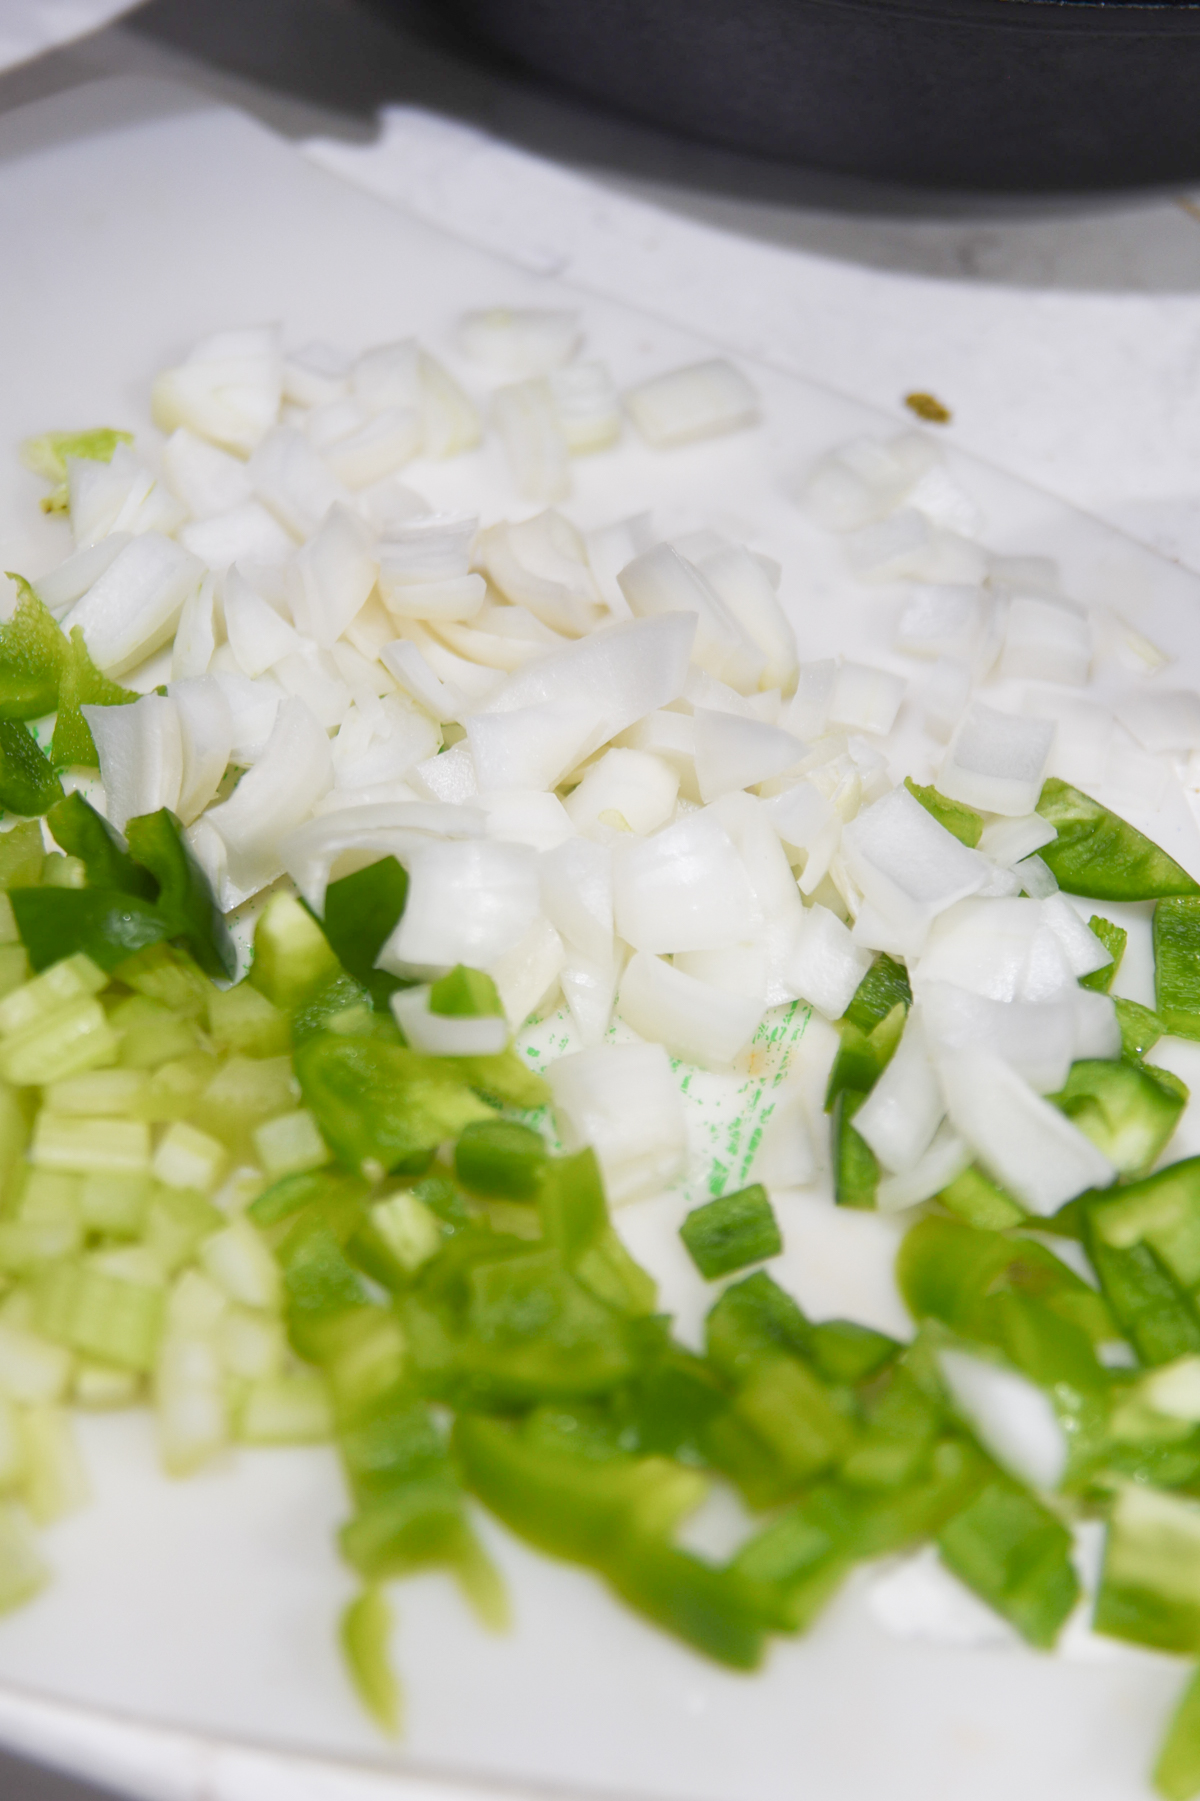 onions and green peppers